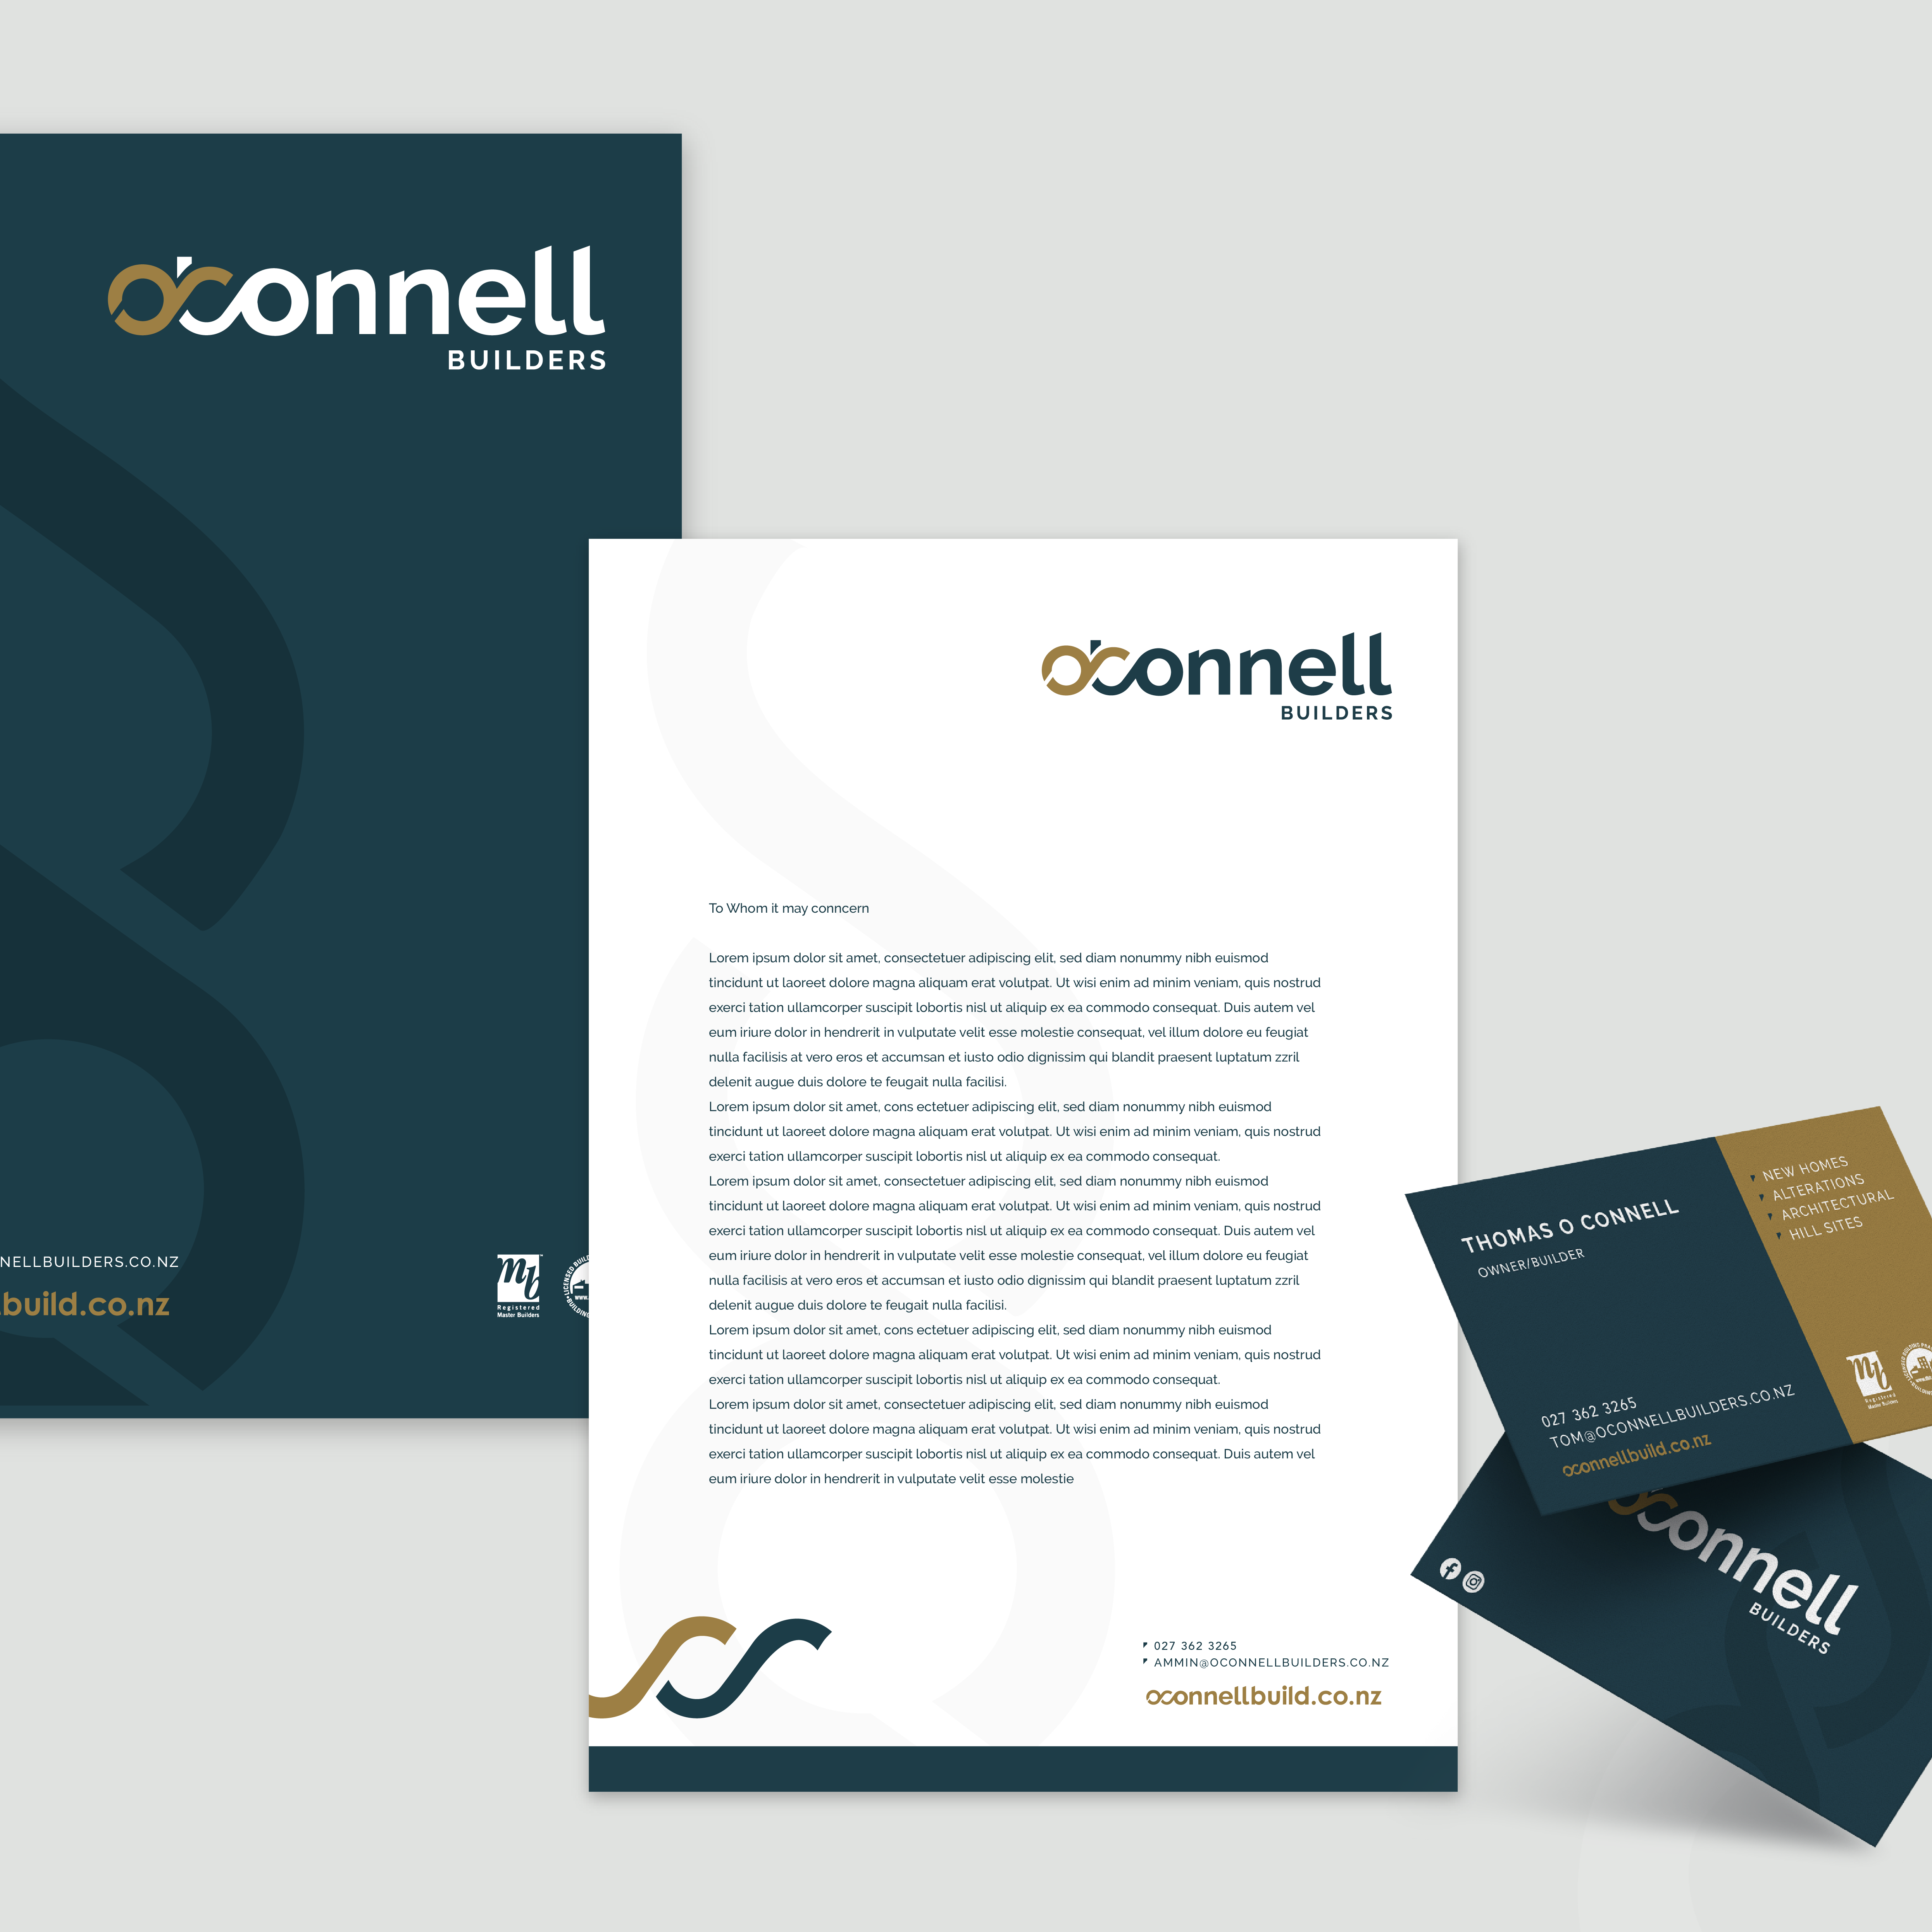 O’Connell Builders